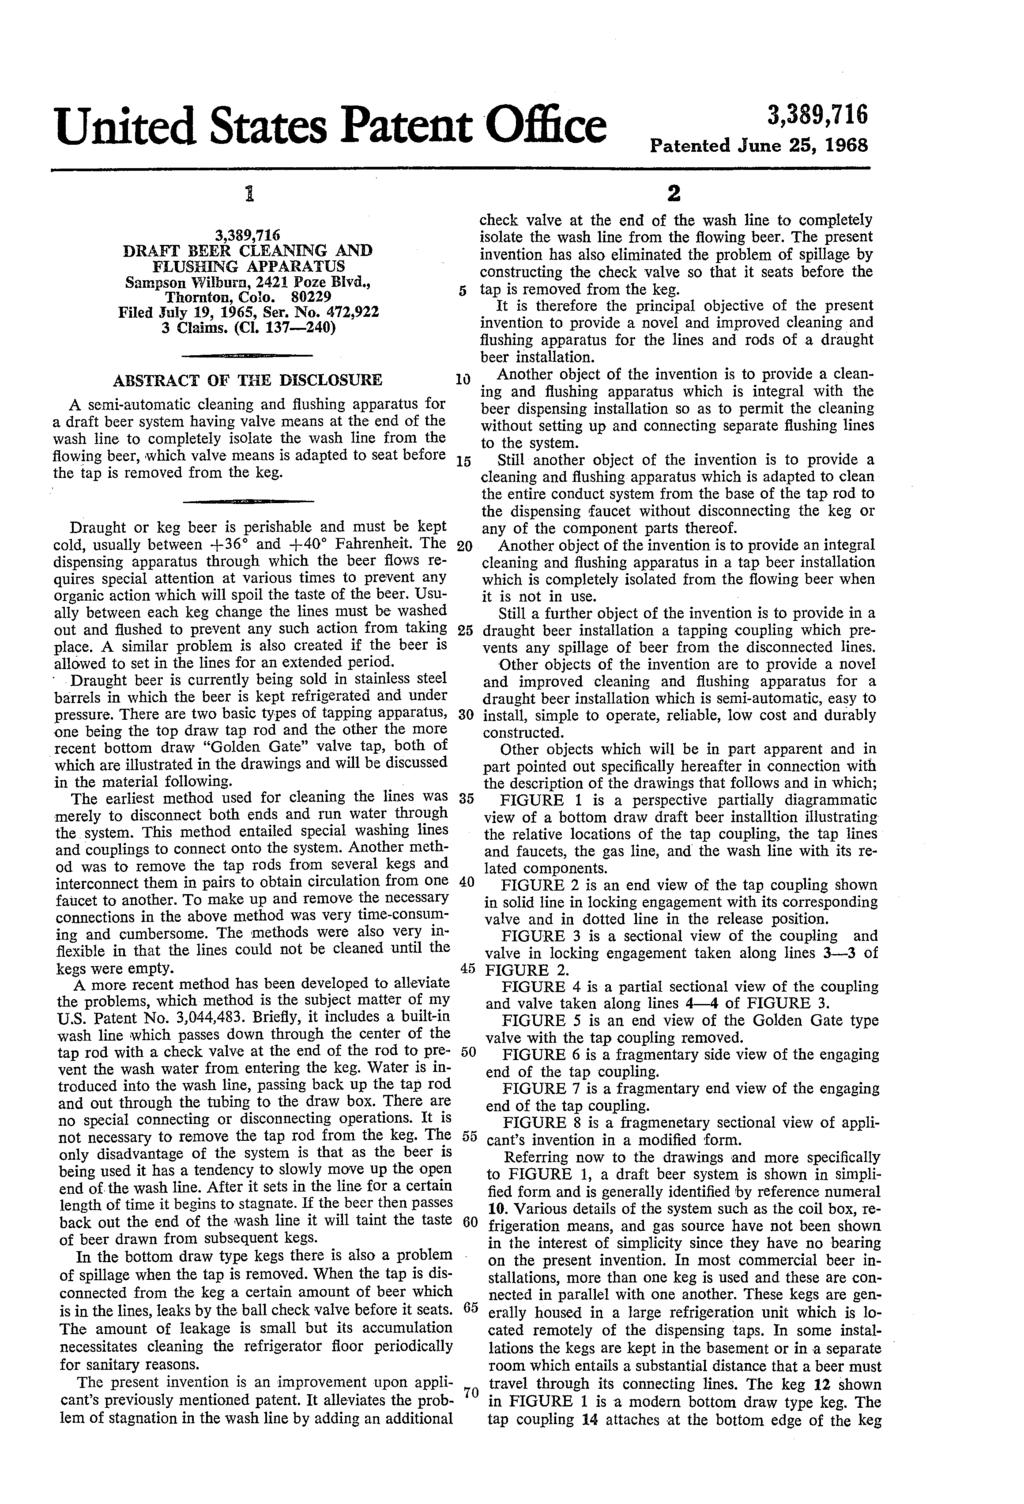 United States Patent Office Patented June 5, 1968 DRAFT BEER CLEANING AND FLUSHING APPARATUS Sampson Wilburn, 4 Poze Blvd., Thornton, Colo. 809 Filed July 19, 1965, Ser. No. 47,9 3 Claims. (Cl.